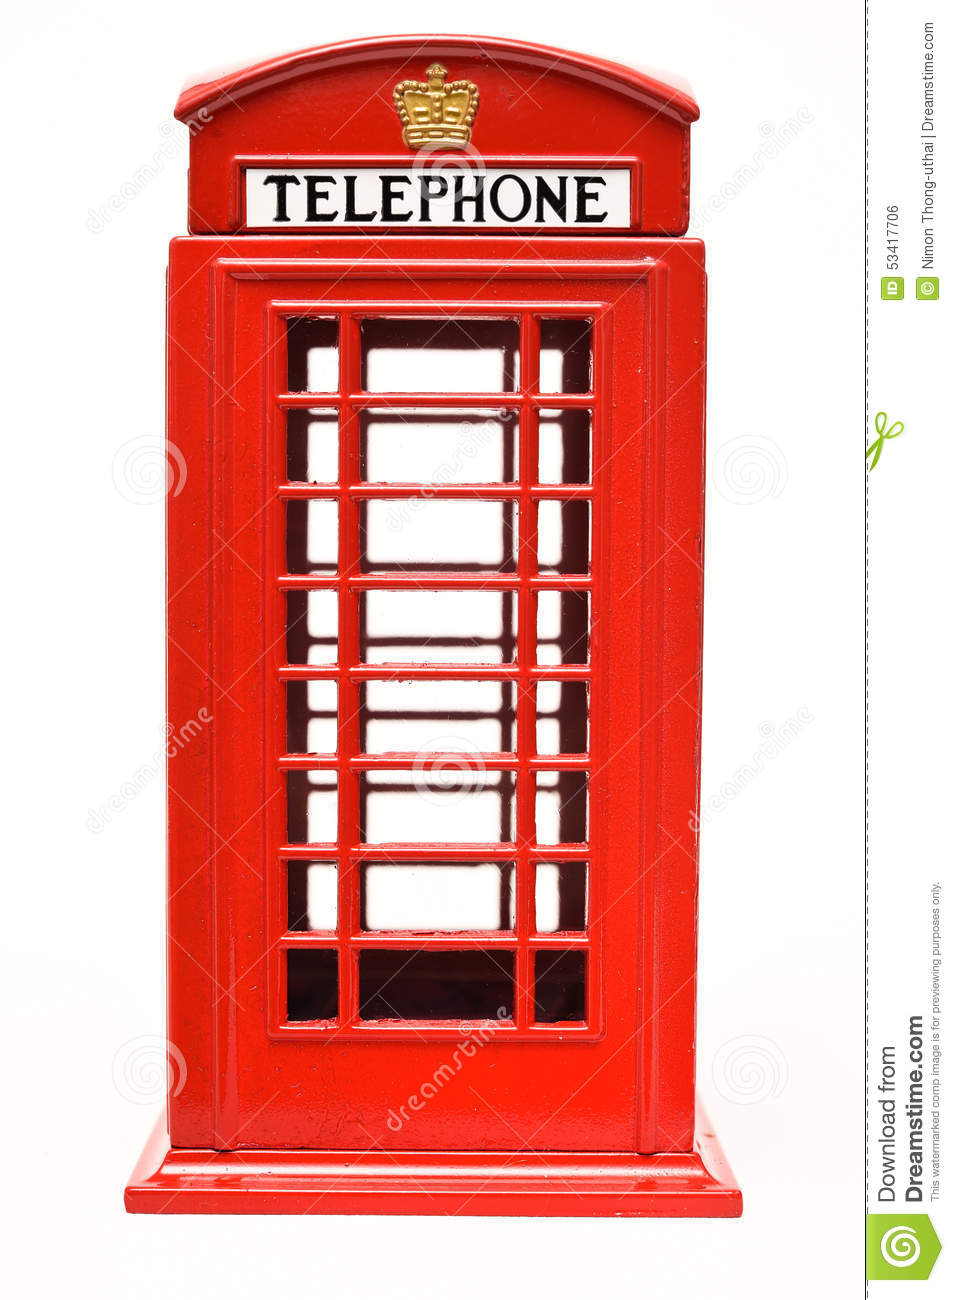 free clip art phone booth - photo #47